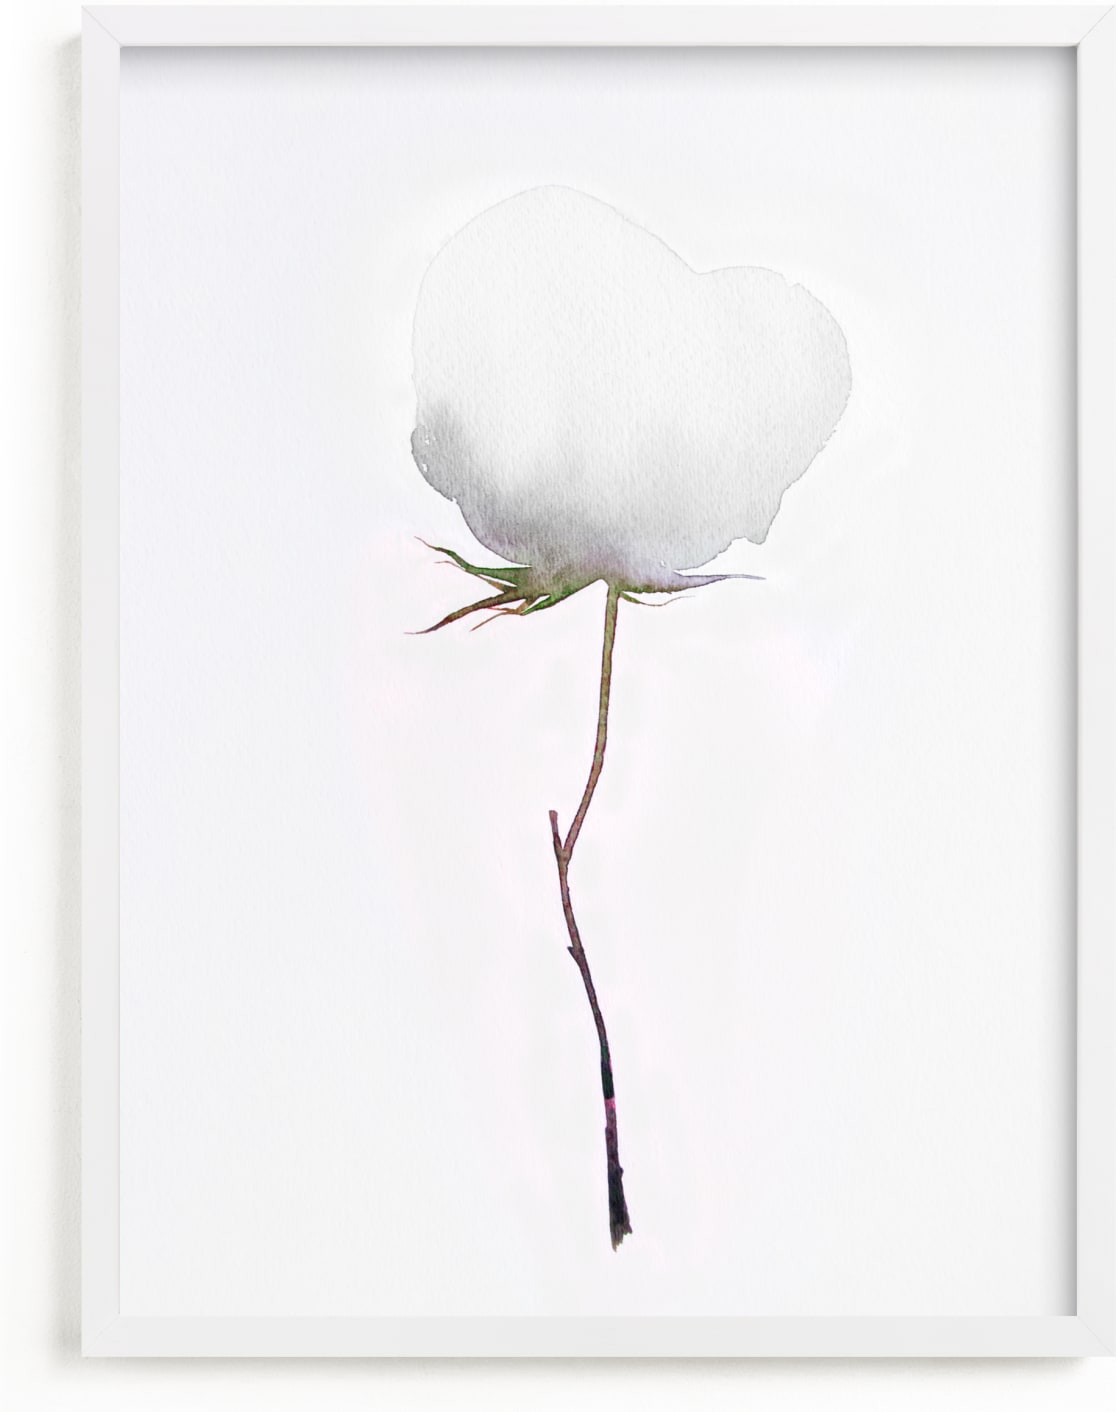 This is a white art by jinseikou called Budding Peony.